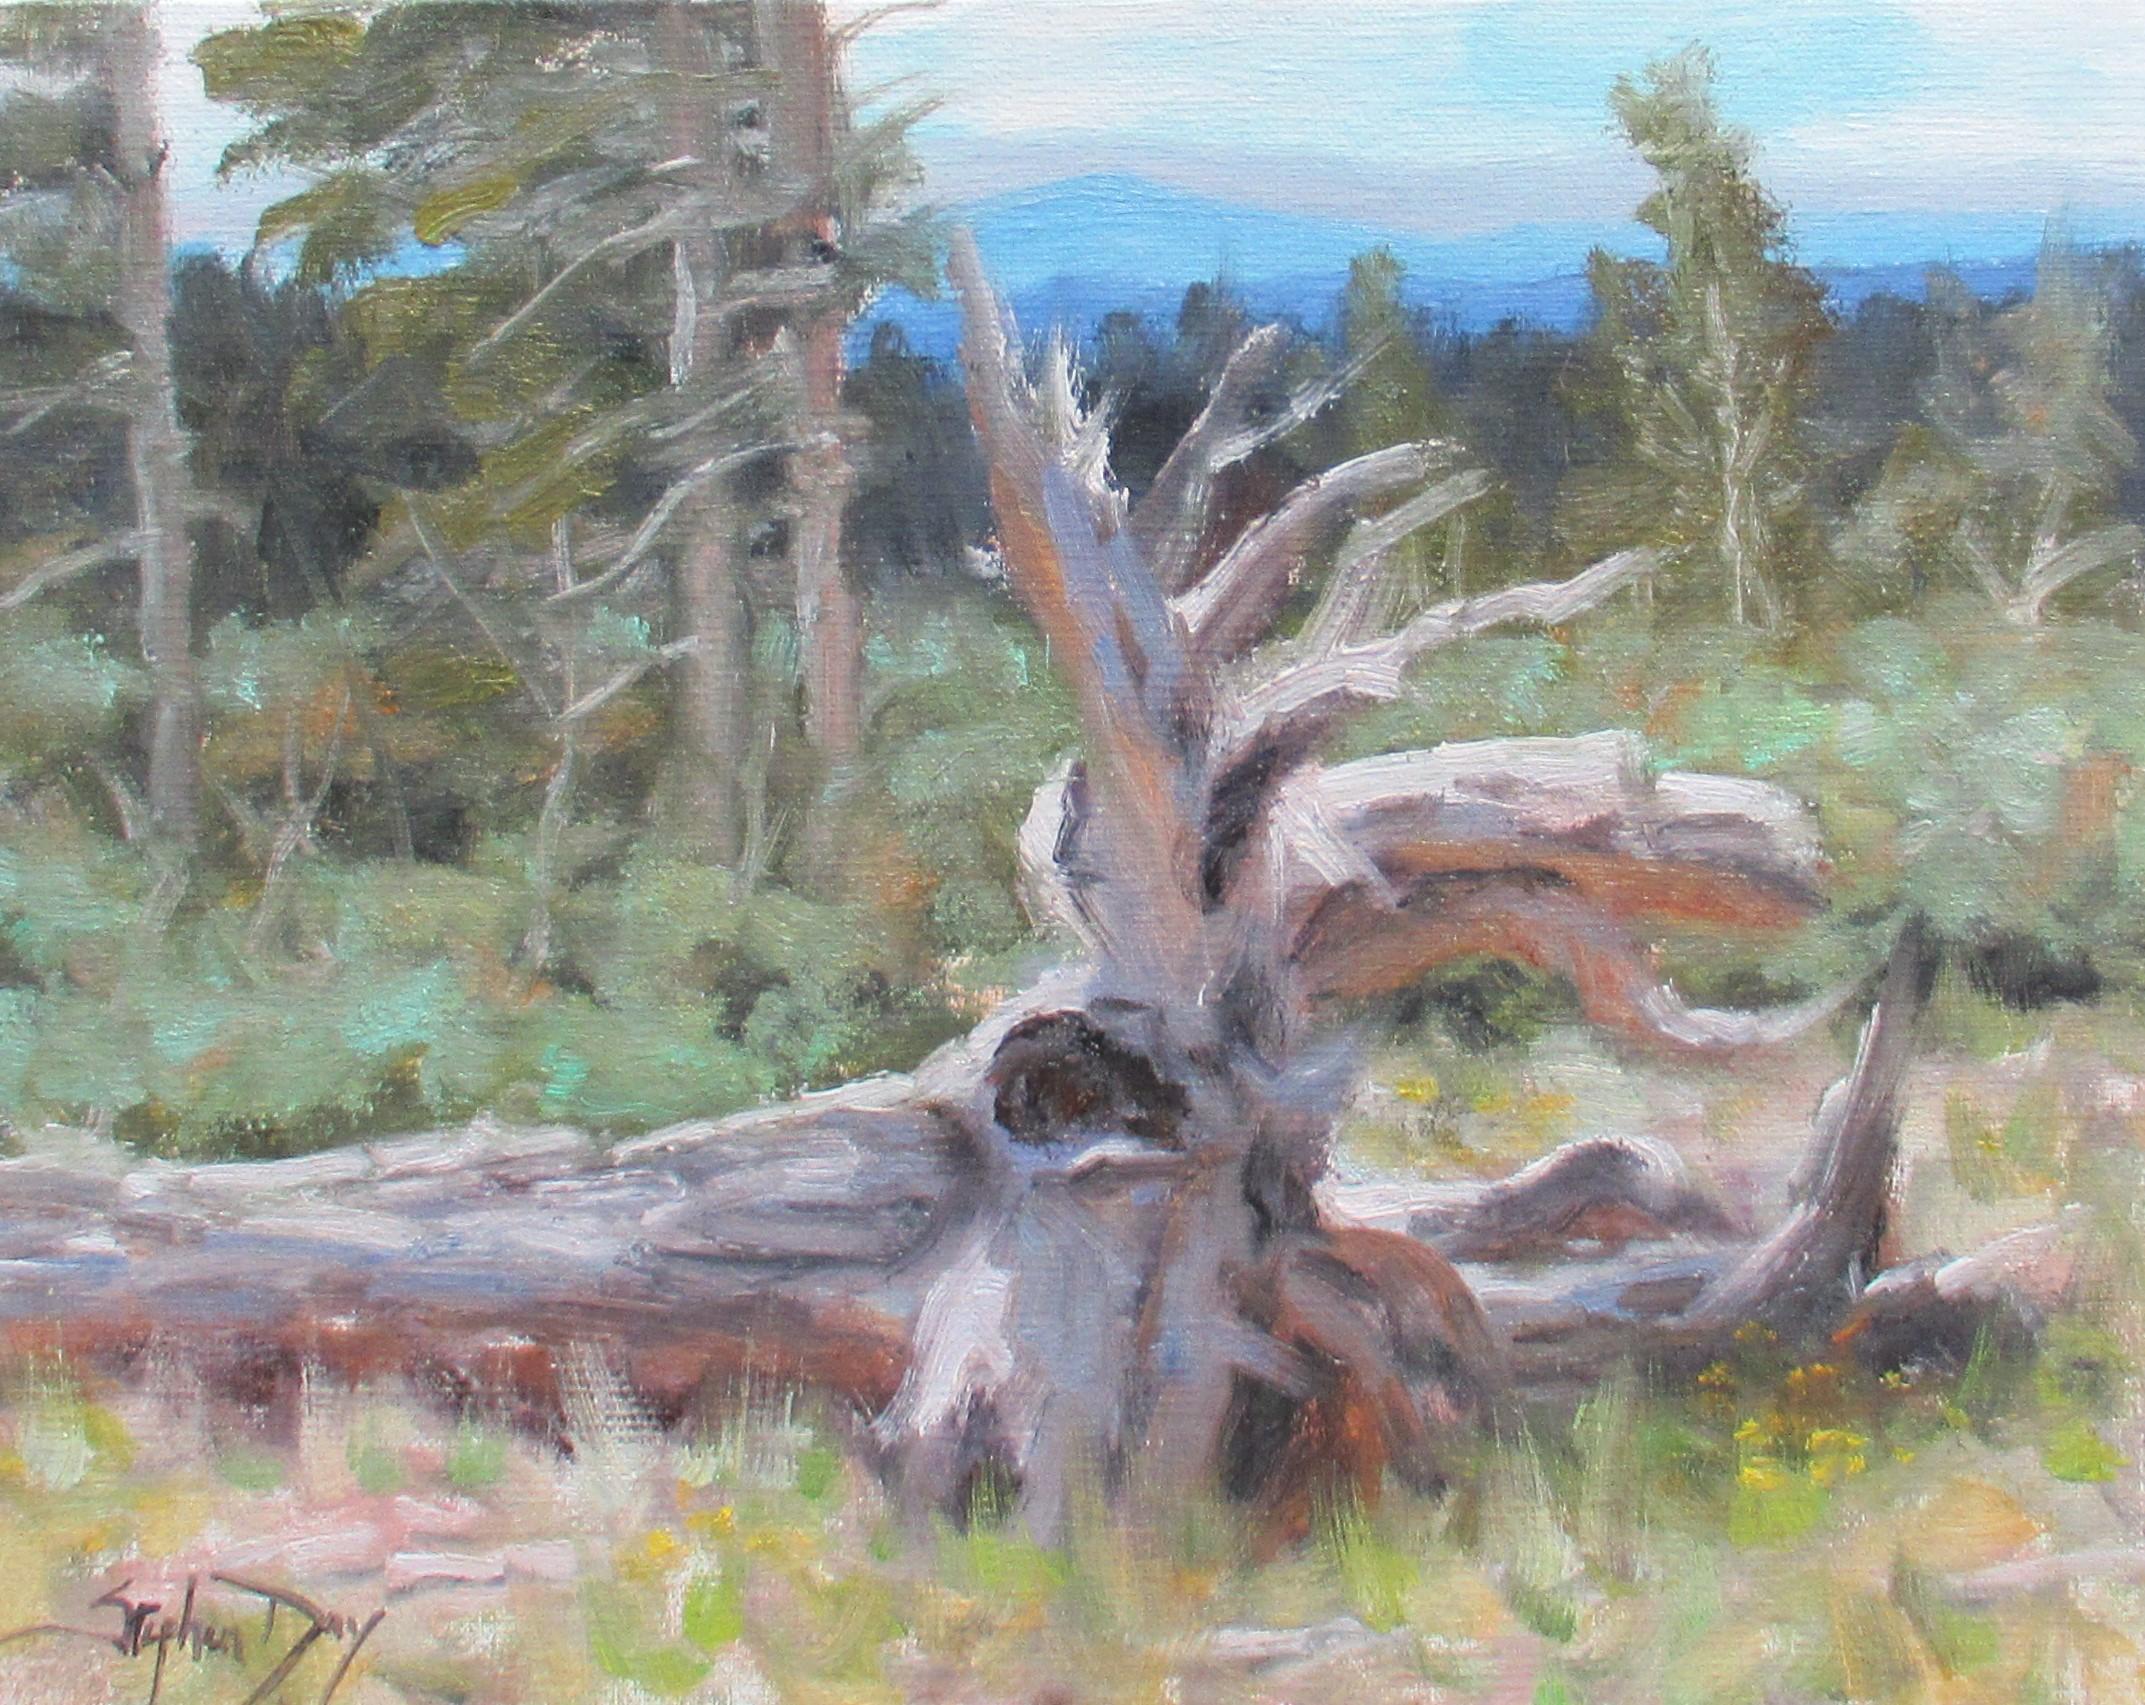 Stephen Day Figurative Painting - "Fallen Timbers" Oil Painting